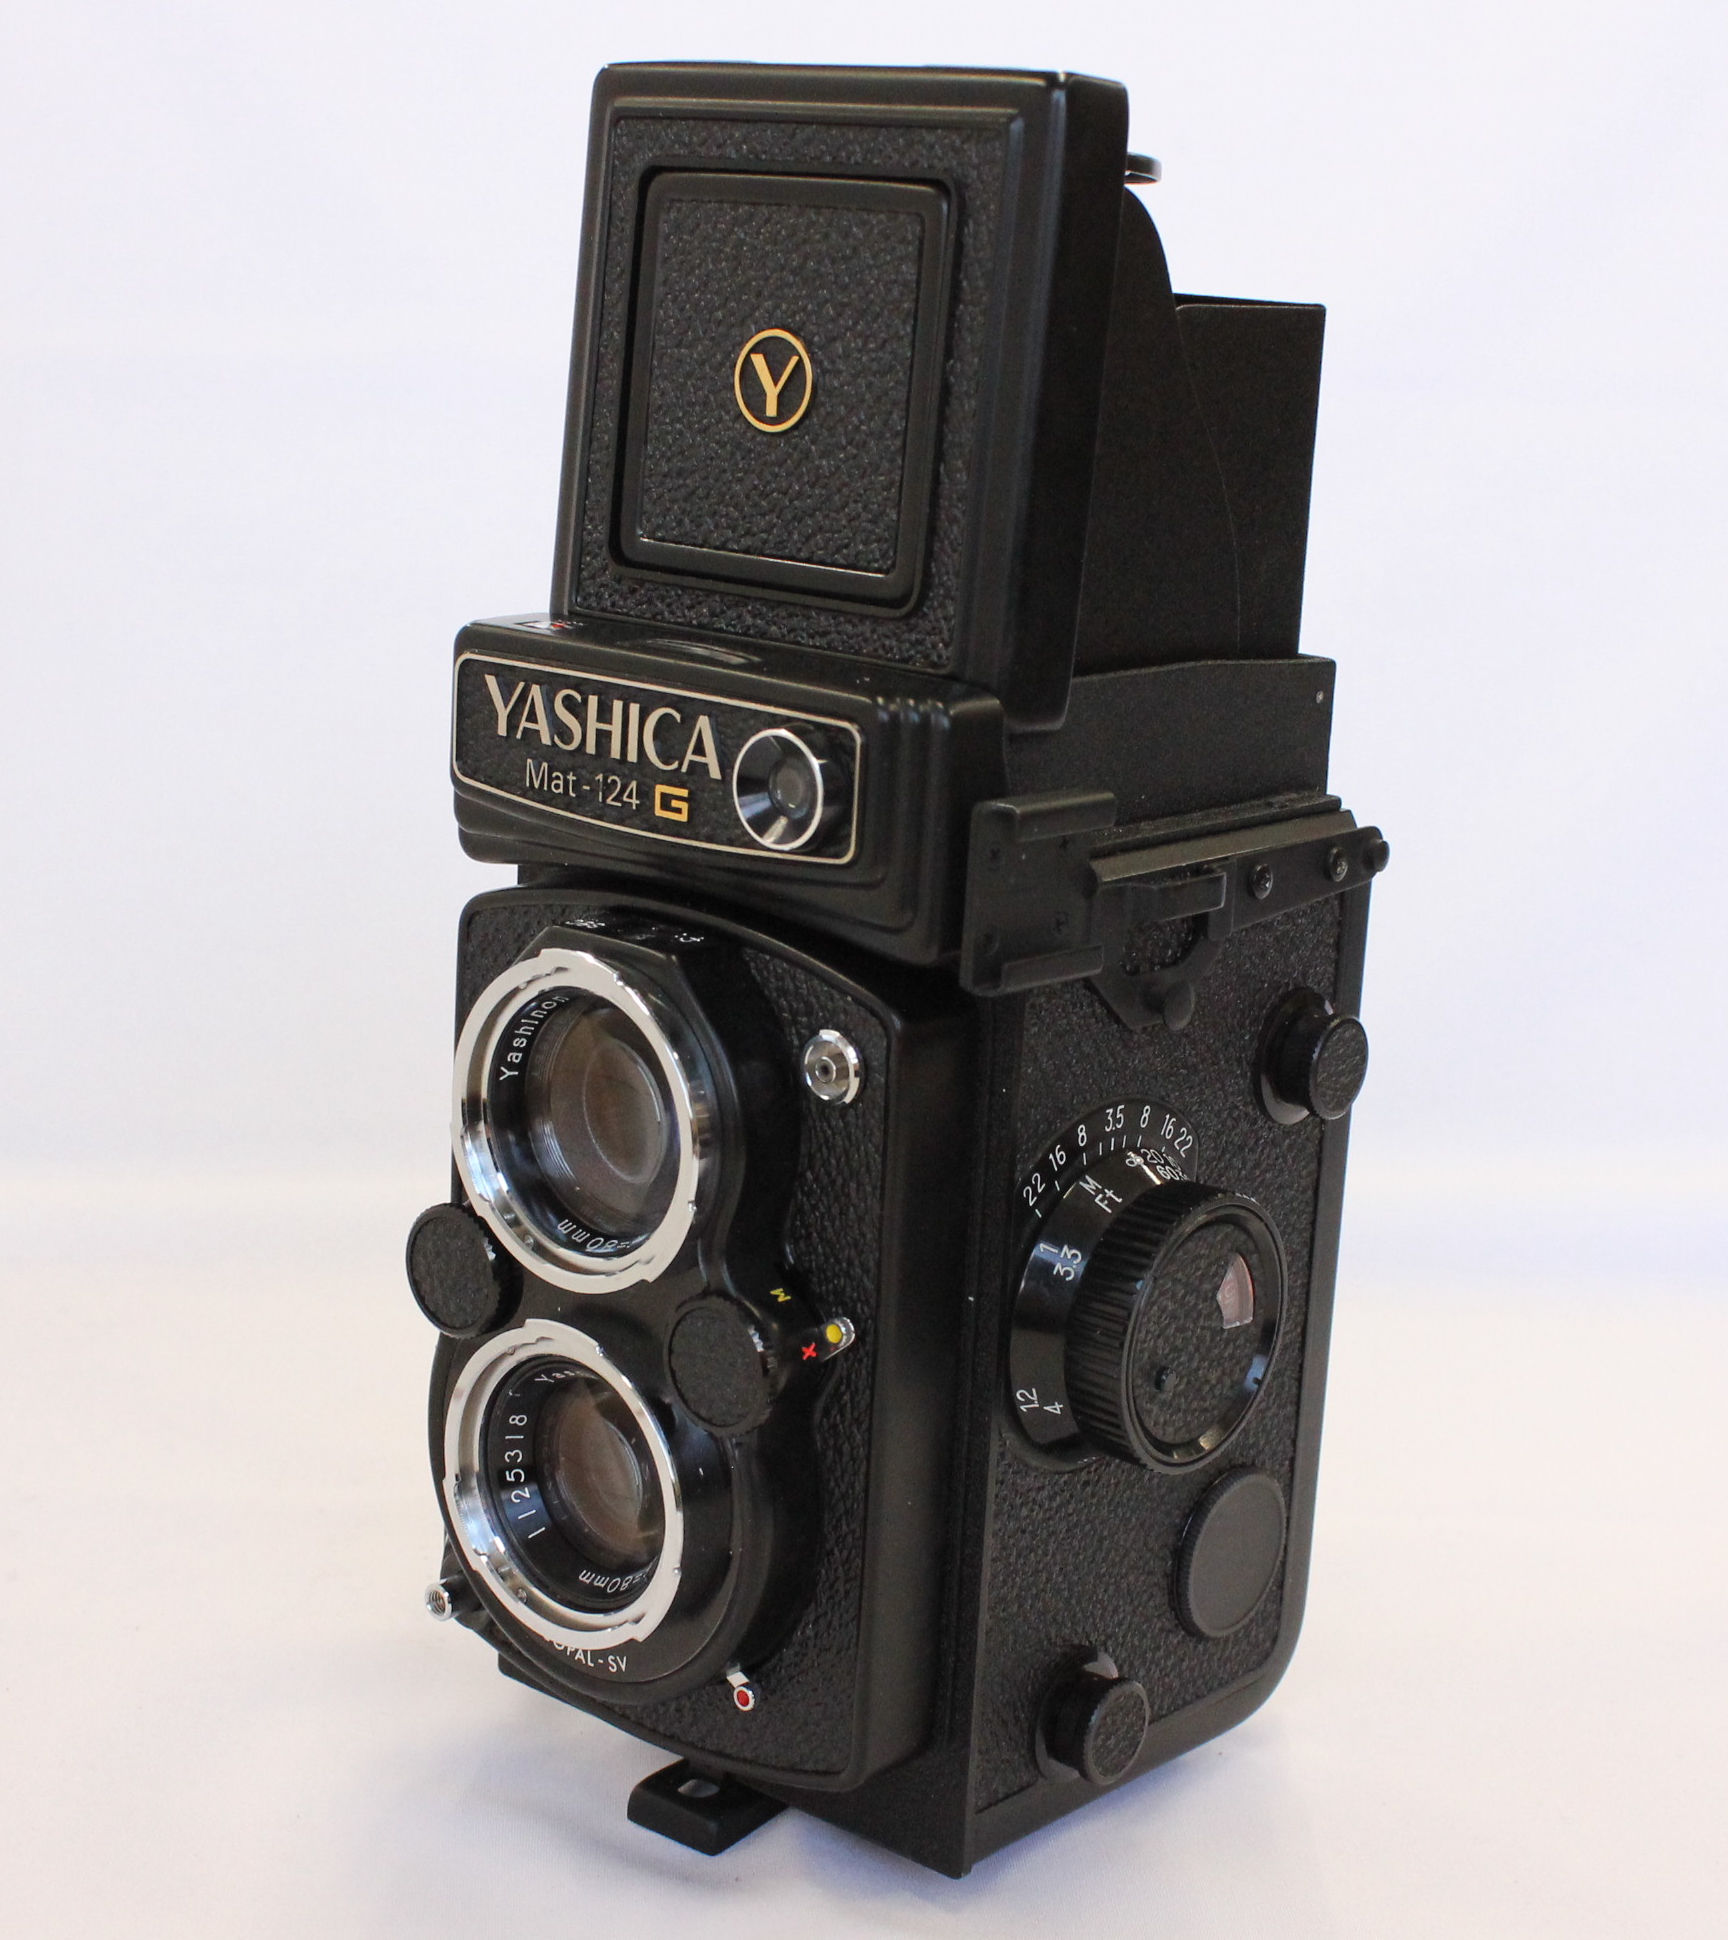  YASHICA MAT 124 G 6x6 TLR Medium Format Camera with 80mm F/3.5 Lens from Japan Photo 3